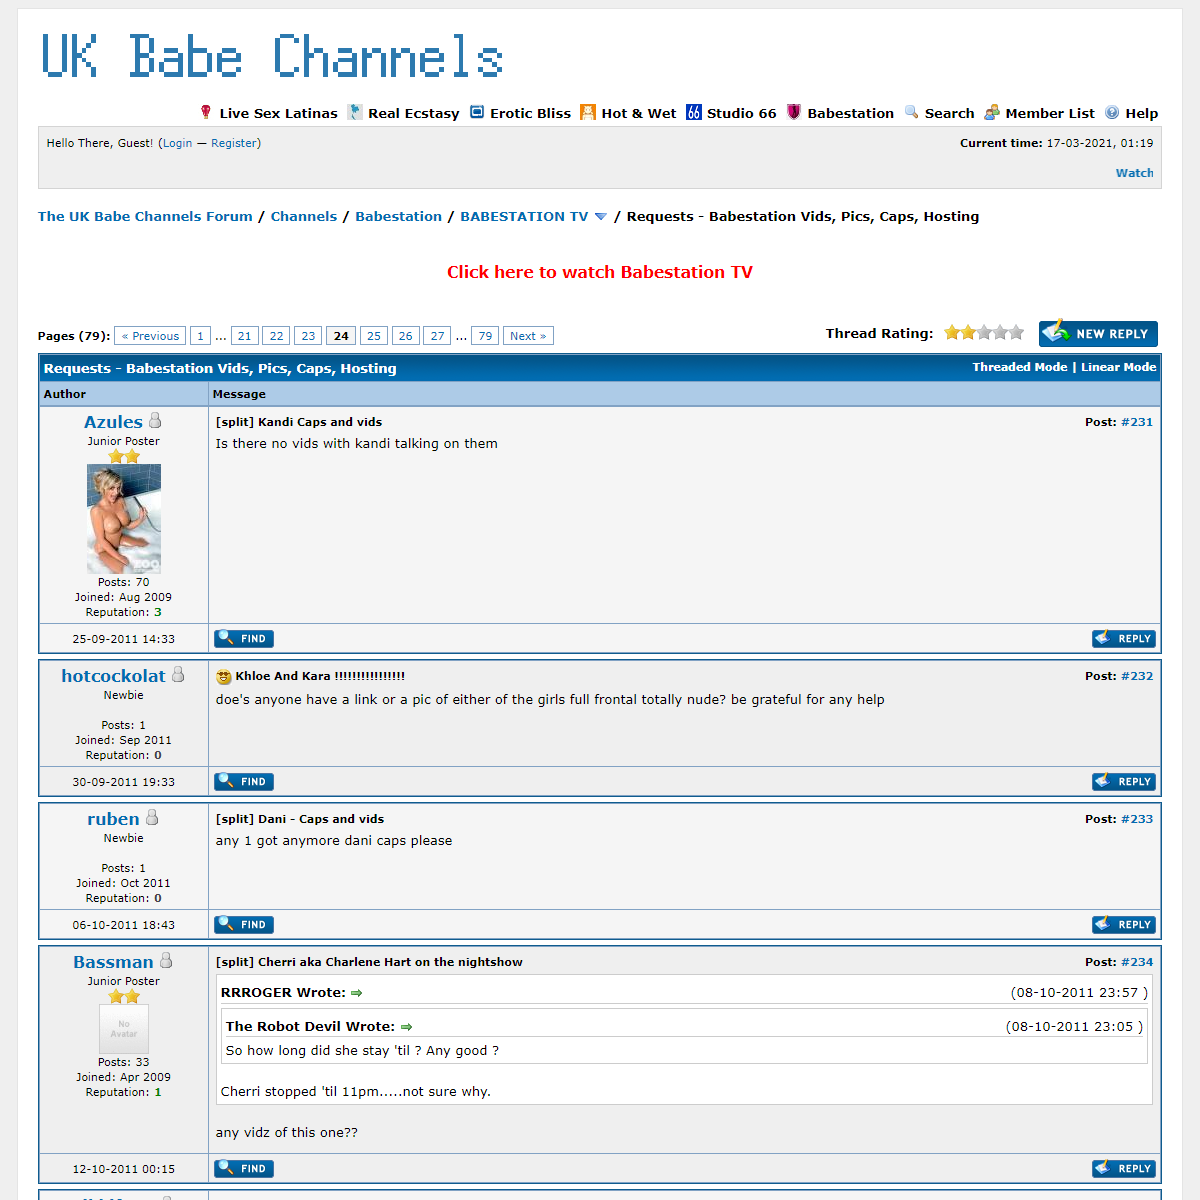 A complete backup of https://www.babeshows.co.uk/showthread.php?tid=29681&page=24